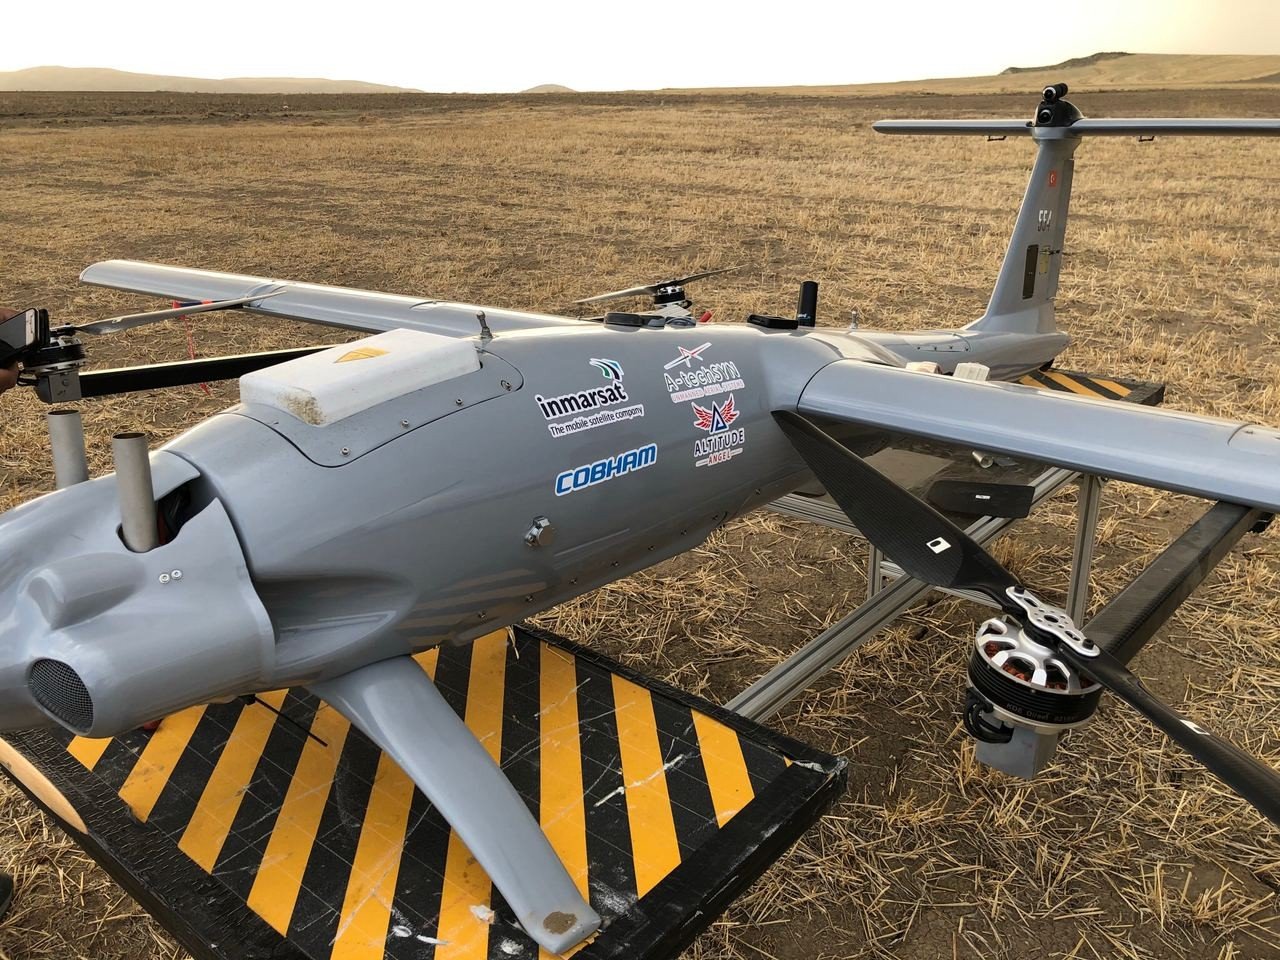 During October and November 2020, an A-TechSYN CGT50 VTOL UAV – using the compact Cobham AVIATOR 200 satcom solution integrated with UAV Navigation’s POLAR Attitude & Heading Reference System (AHRS) - flew numerous BVLOS flights, connected and tracked using Inmarsat’s global L-band satellite network.